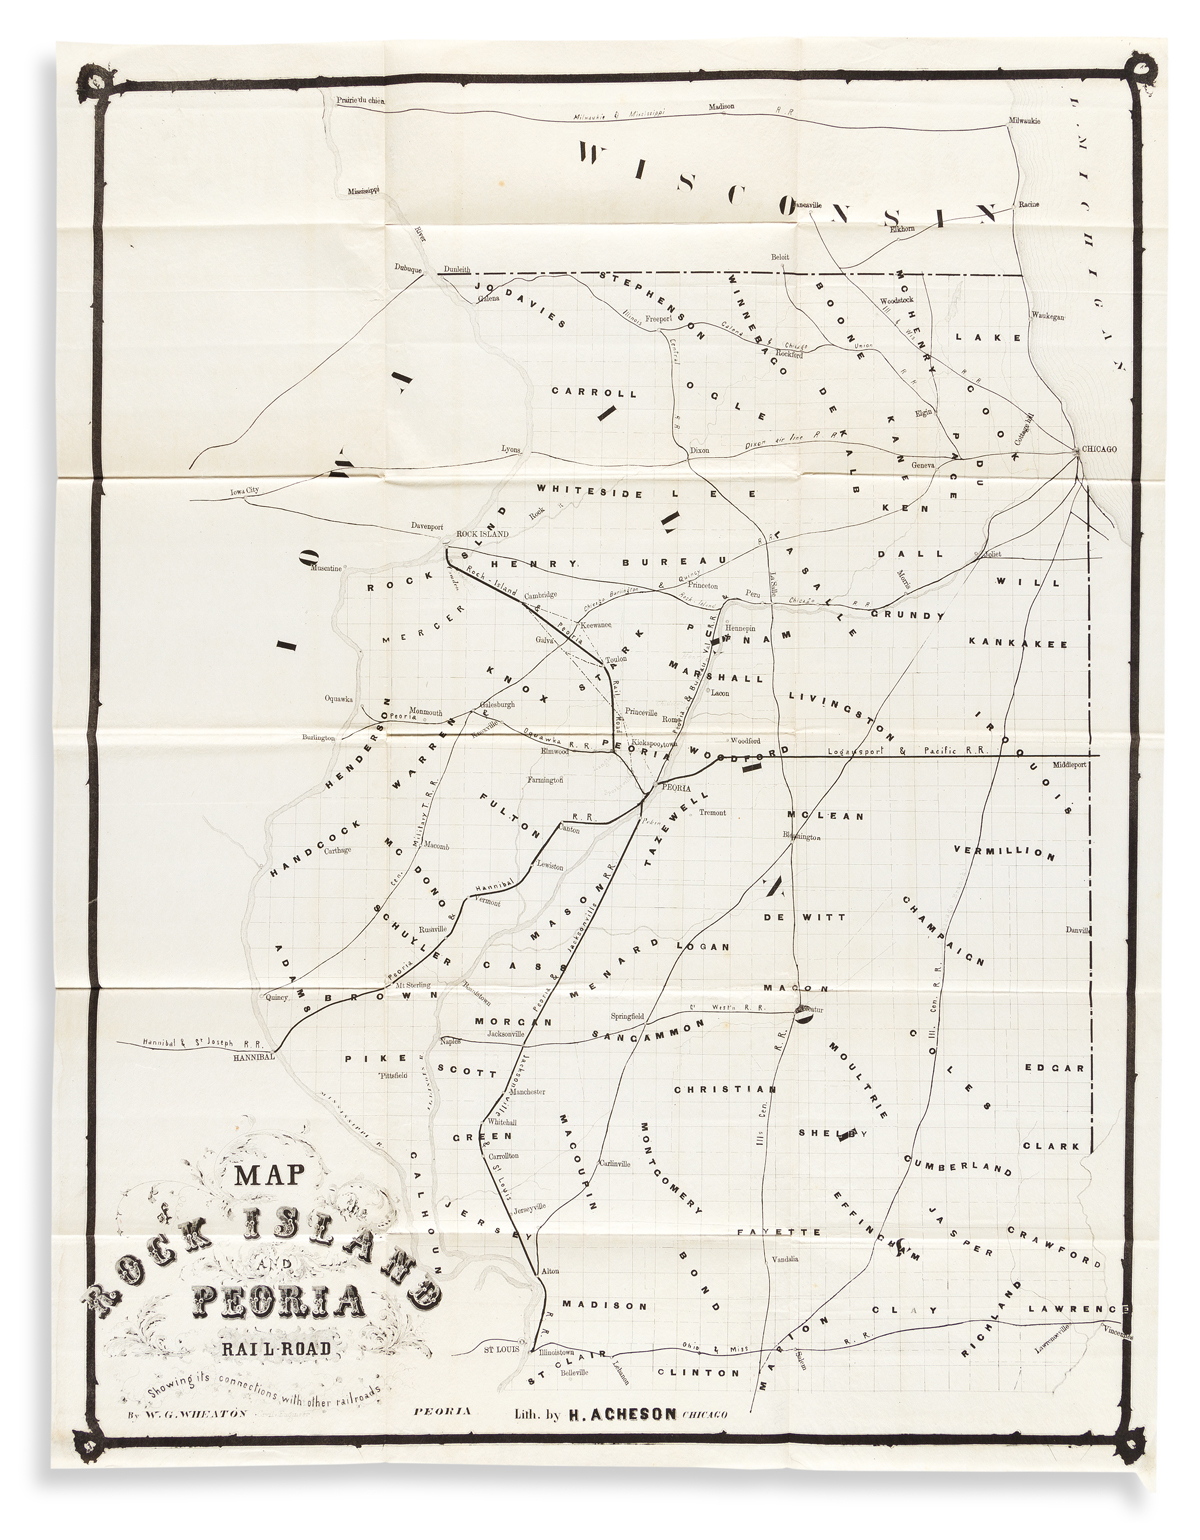 (RAILROADS -- ILLINOIS.) W.G. Wheaton. Map of the Rock Island and Peoria Railroad Showing Its Connections with Other Railroads.